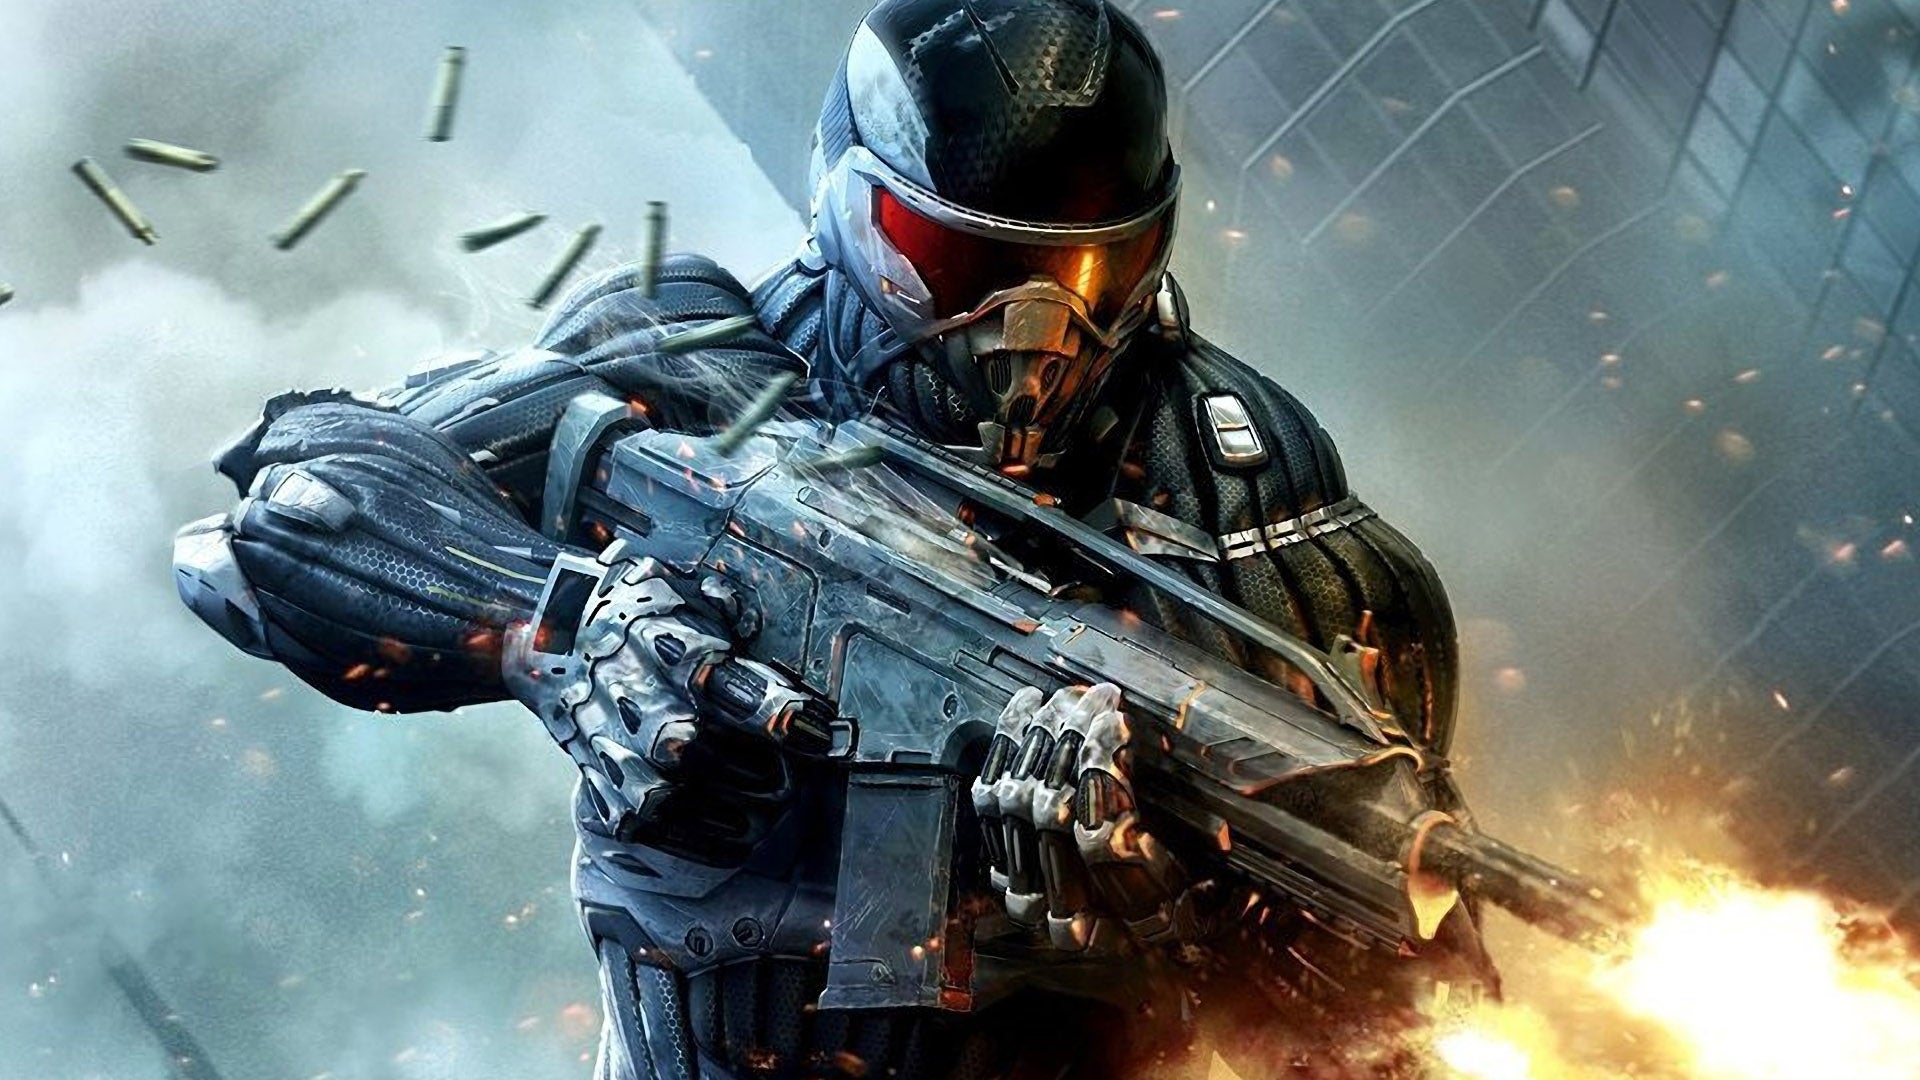 Image for Exclusive: Inside Crysis 2 Remastered - The Crytek Tech Breakdown - First PS5 Footage